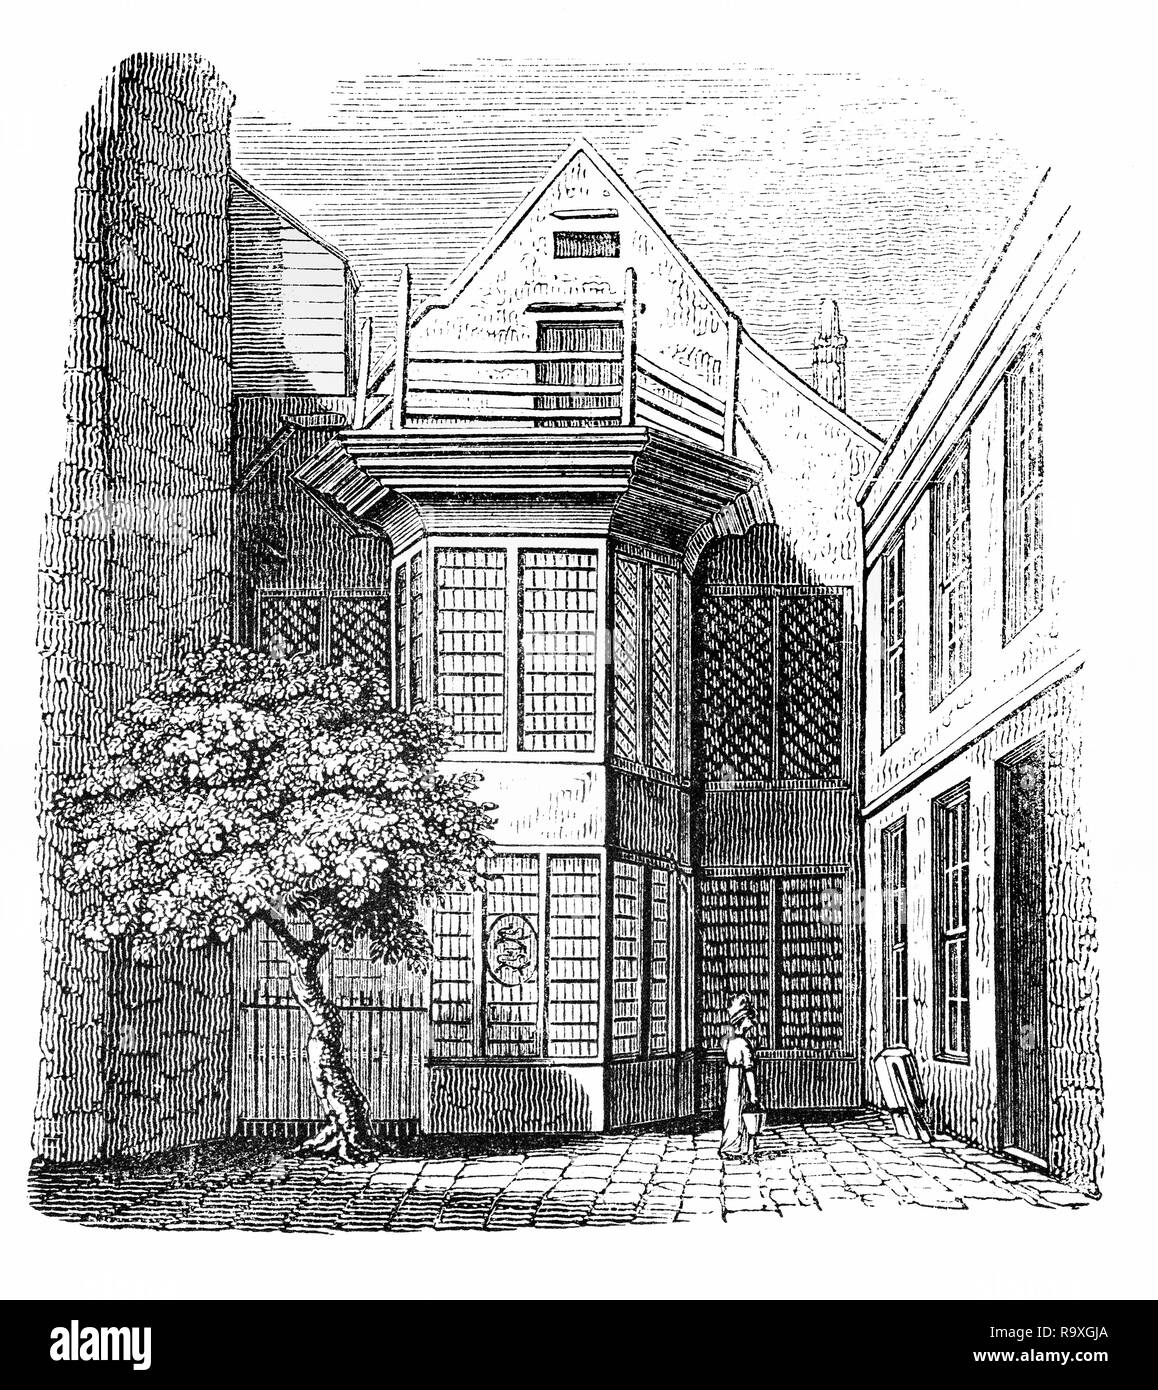 Bangor House in Shoe Lane, or Shoe Alley as it was sometimes called in the sixteenth century, was outside the city wall, in the ward of Faringdon Without. It was the town house of the Bishops of Bangor and adjoined the churchyard of St. Andrew, Holborn, City of London, England, later purchased by Sir John Barkstead in 1647, but after the Restoration it reverted to the Bishops of Bangor who resided there. Stock Photo